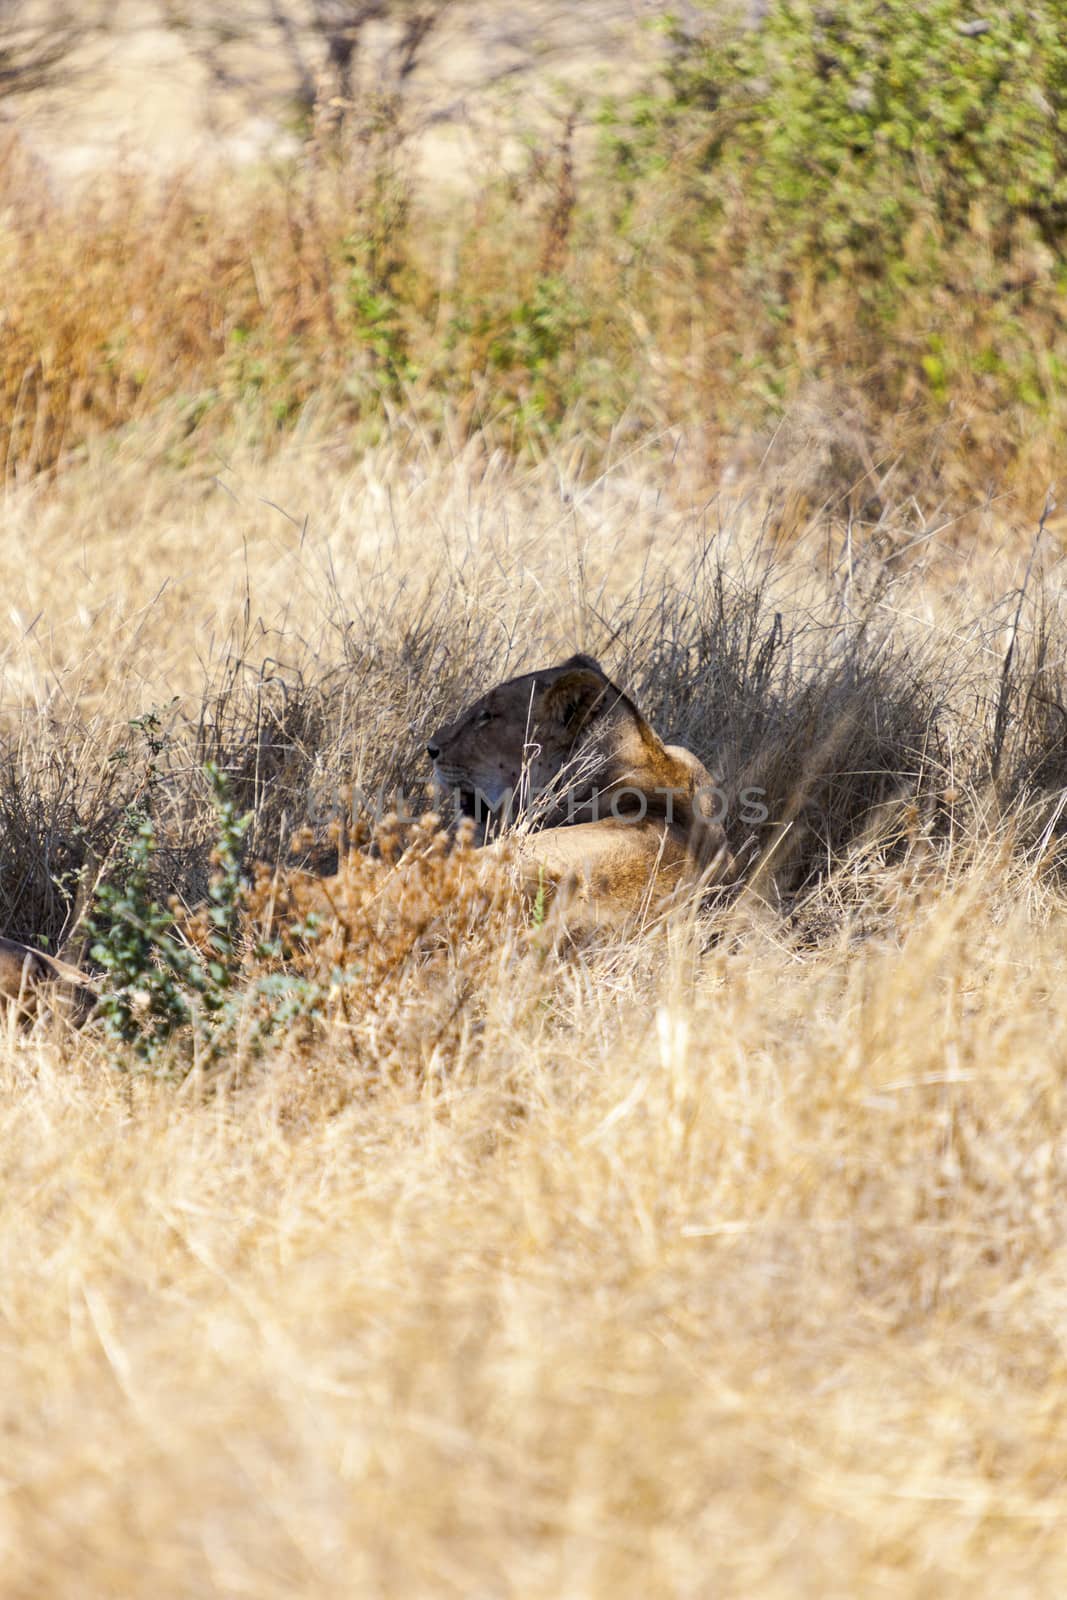 Resting lion in the tall grass in Tanzania